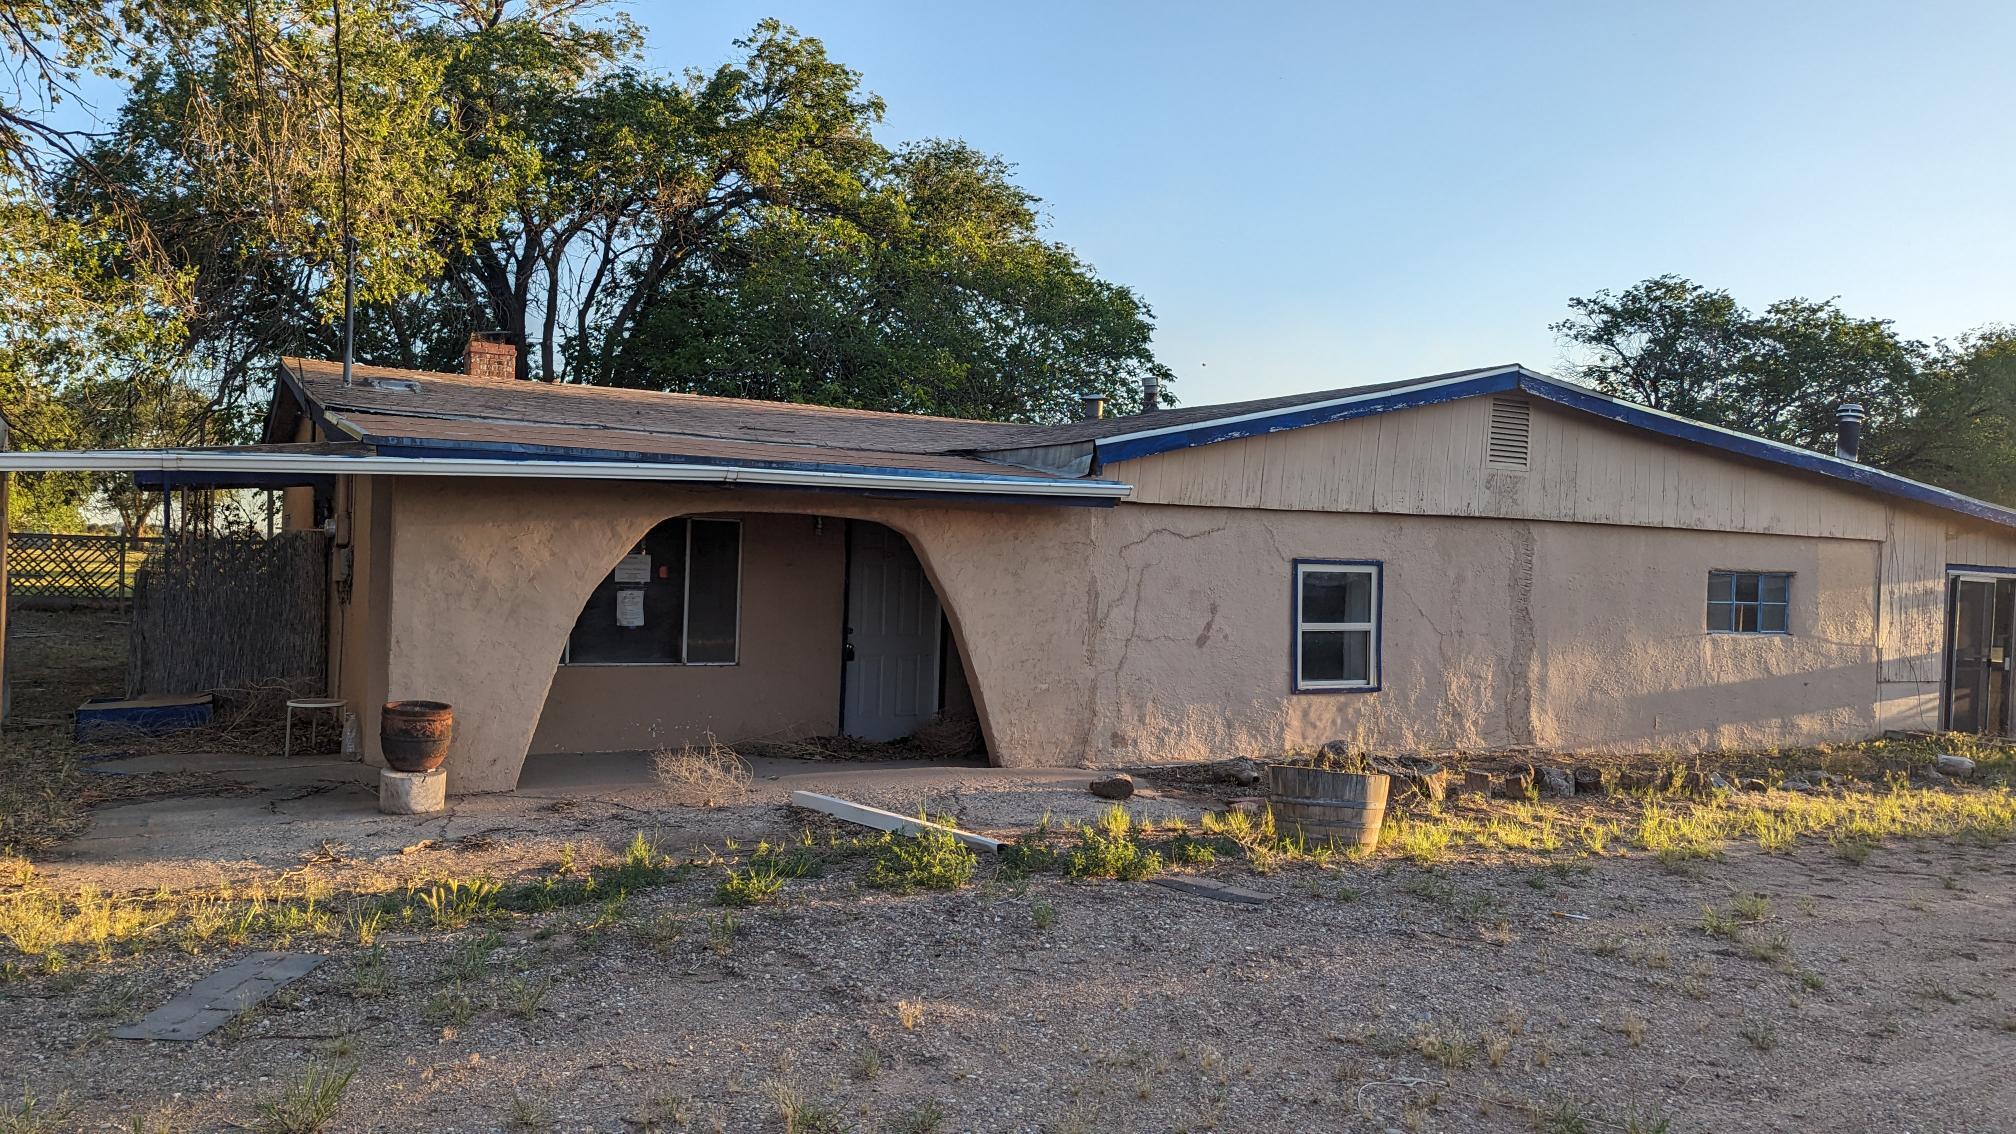 A true diamond in the rough. 3 bedroom 2 bath home on 1 acre lot. Plenty of yard for gardening. Trees for shade. MUST SEE TO APPRECIATE.  SELLER DOES NOT PAY GRT. Cash offers require 10% EMD or $1,000 minimum, whichever is greater. All financial offers require 1% EMD or $1,000 minimum, whichever is greater. Once offer is approved  Agent will have 72 hours to upload state promulgated contract and applicable addendums. Buyer is required to submit their EMD to Sellers Title Companywithin 48 hours of Sellers Executed Contract. Earnest Money Deposit is to be made payable to Seller's Title, Buyer's and Listing agents to ensure. Technology Fee is included in the closing disclosure. Seller Does not Accept blind offers or escalation clauses. SELLER WILL NOT PAY FOR ANY REPAIRS.